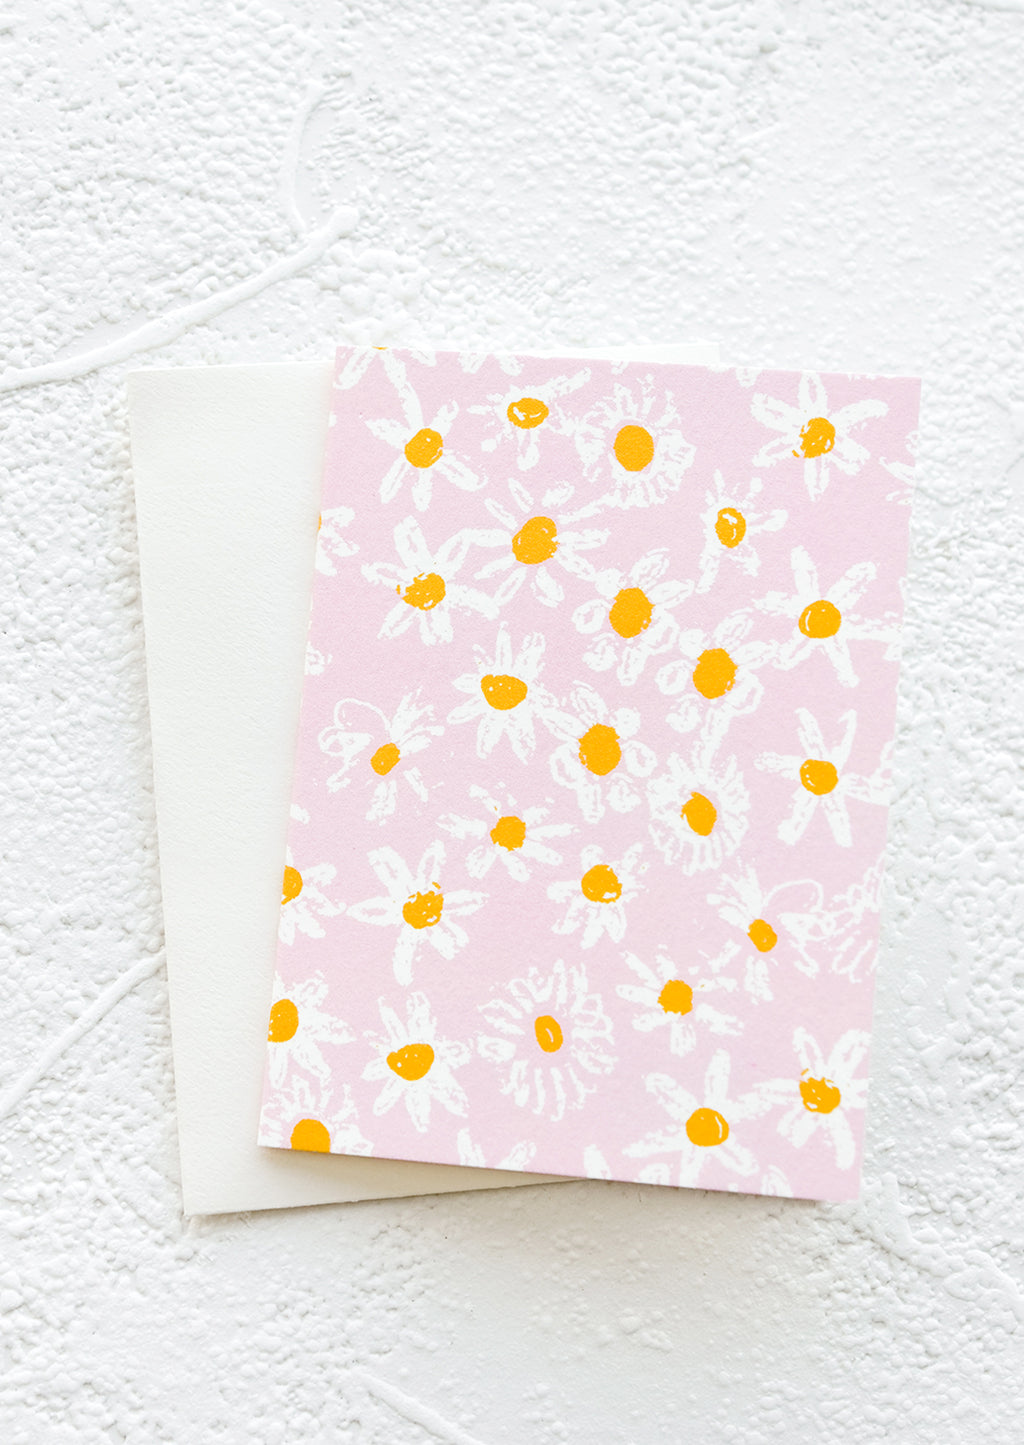 Pink Daisies: A gift enclosure greeting card with a pink background and daisy print.